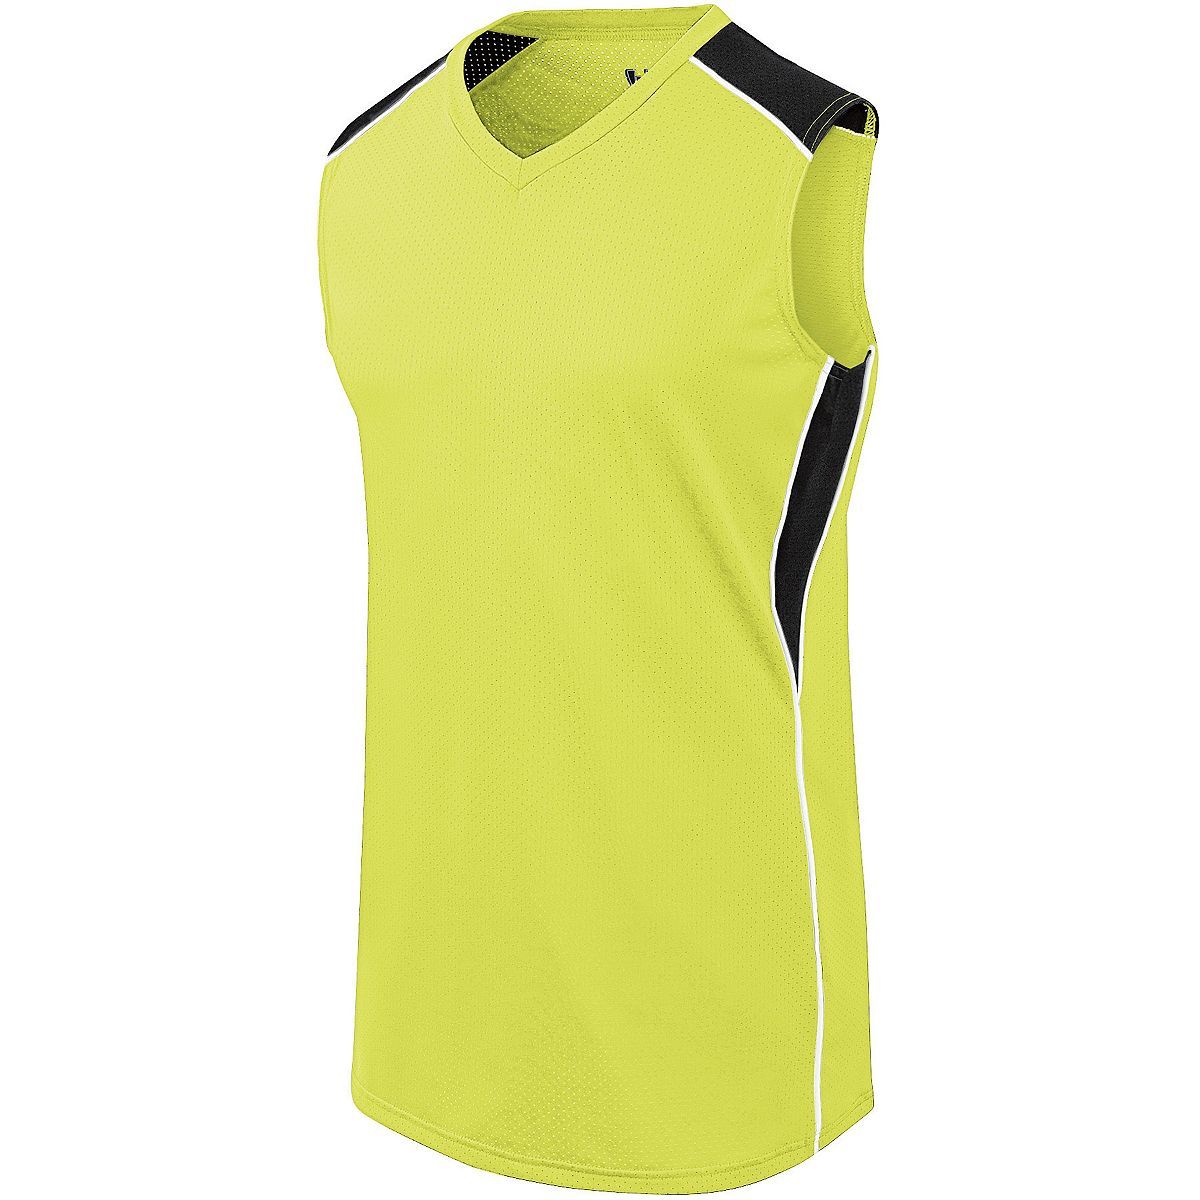 Augusta Sportswear Ladies Dynamite Jersey in Lime/Black/White  -Part of the Ladies, Ladies-Jersey, Augusta-Products, Softball, Shirts product lines at KanaleyCreations.com